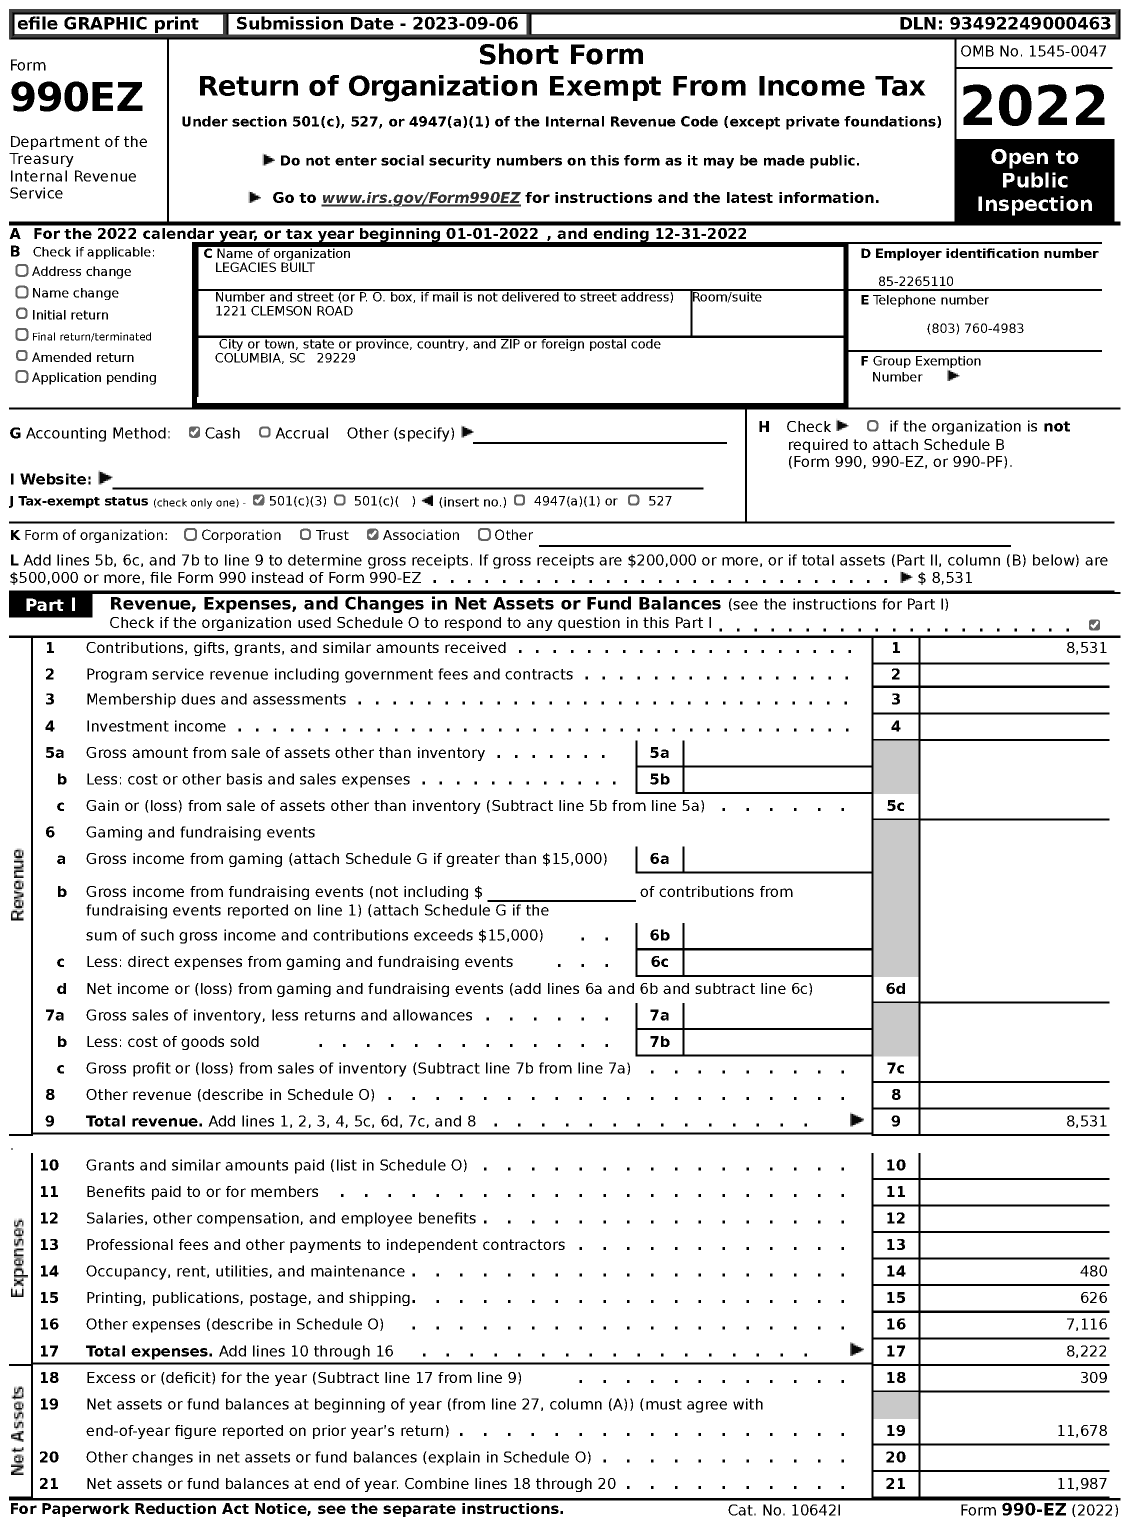 Image of first page of 2022 Form 990EZ for Legacies Built